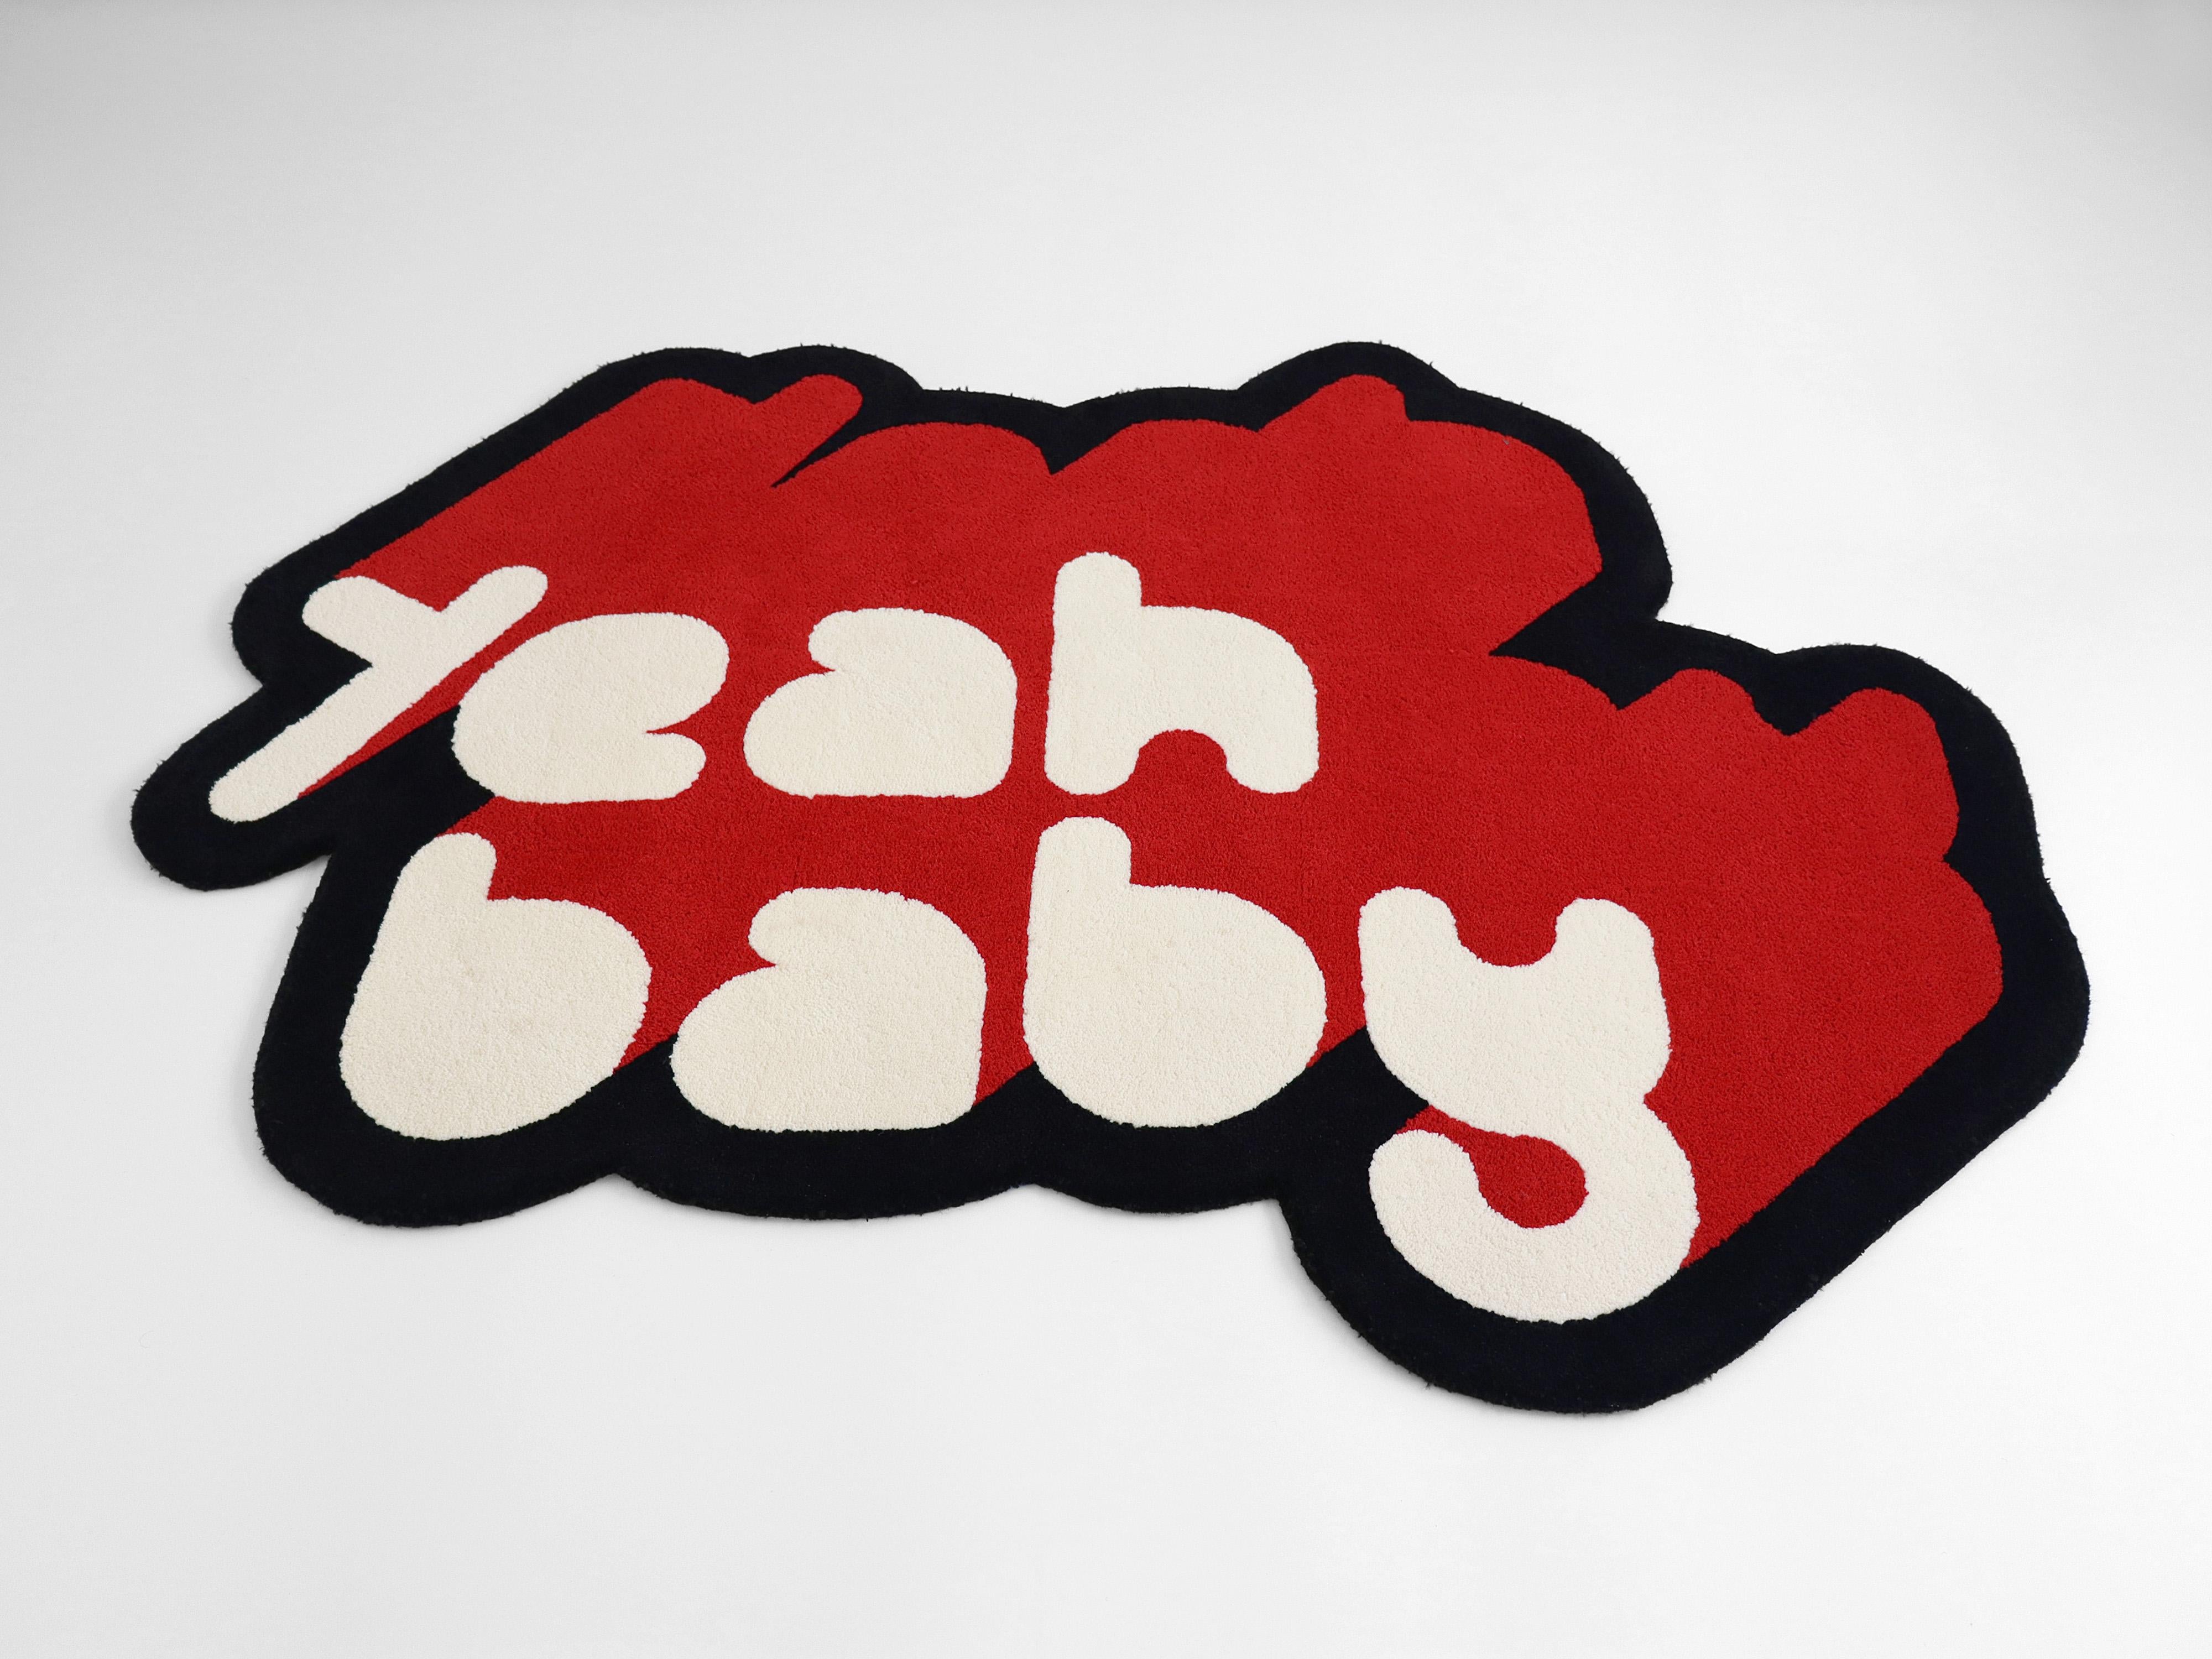 Nylon Red, White and Black Yeah Baby Rug from Graffiti Collection by Paulo Kobylka For Sale